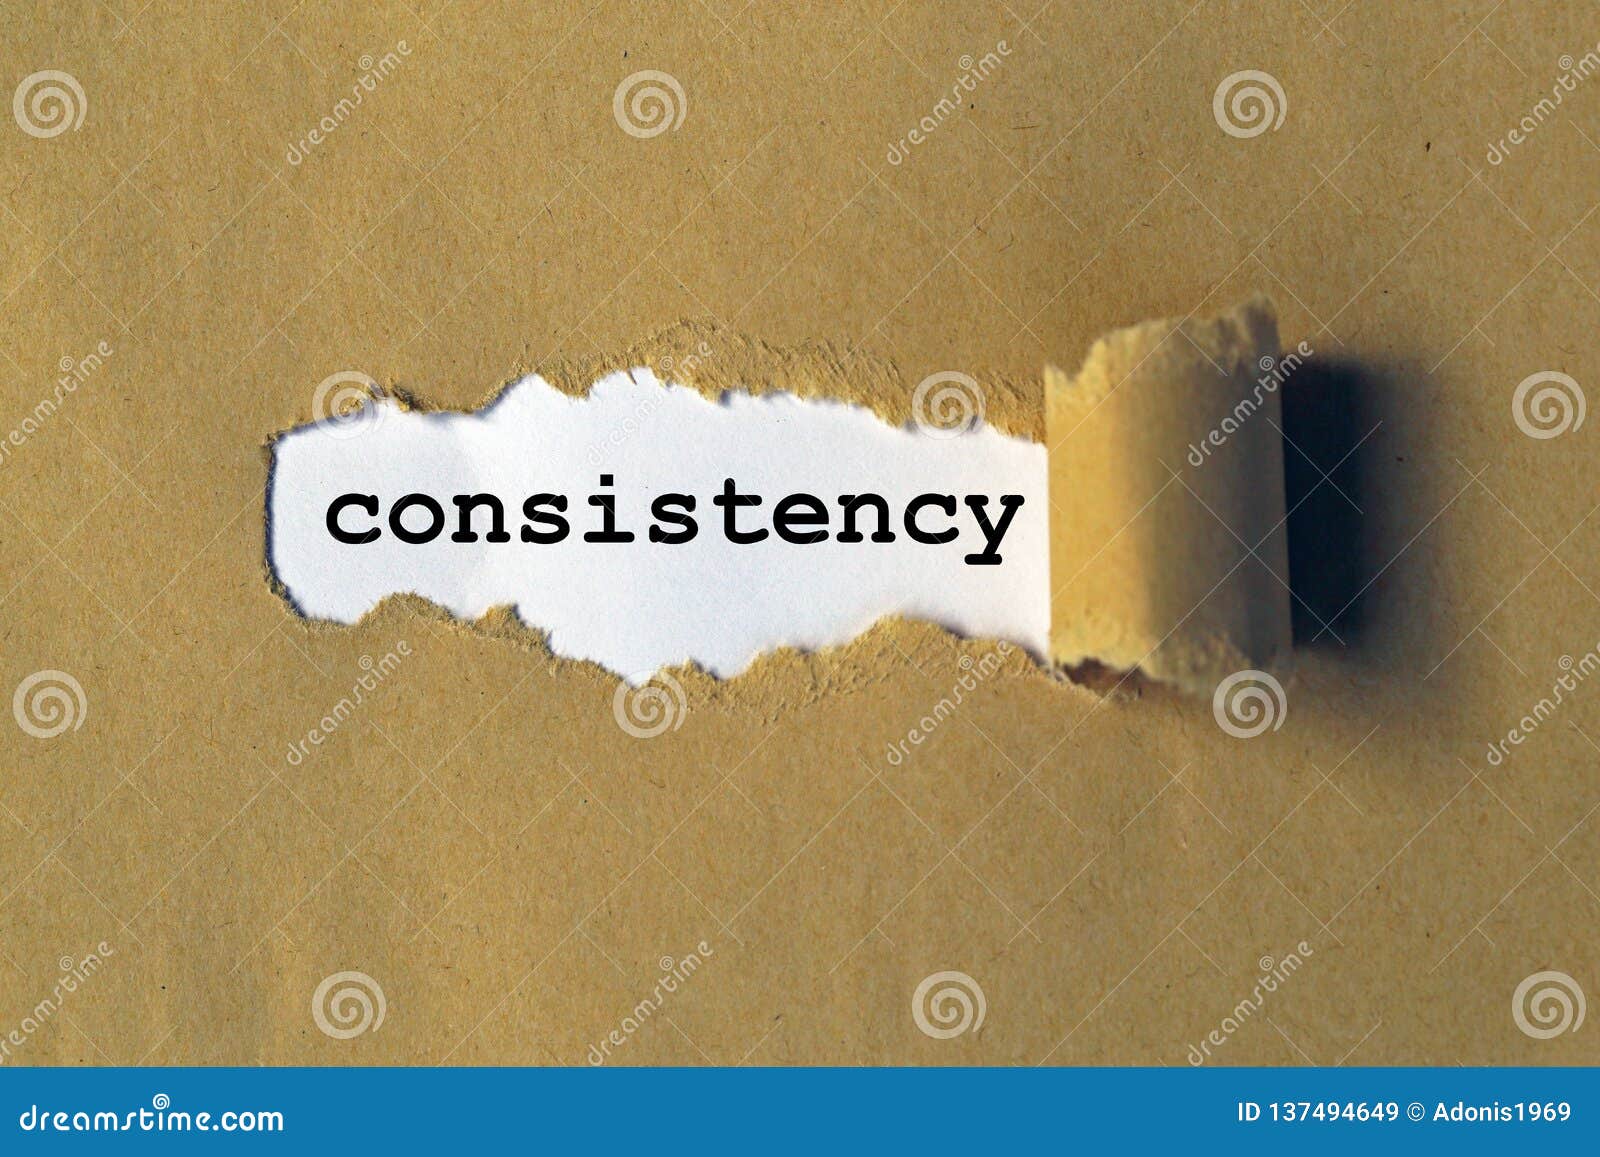 consistency word on paper